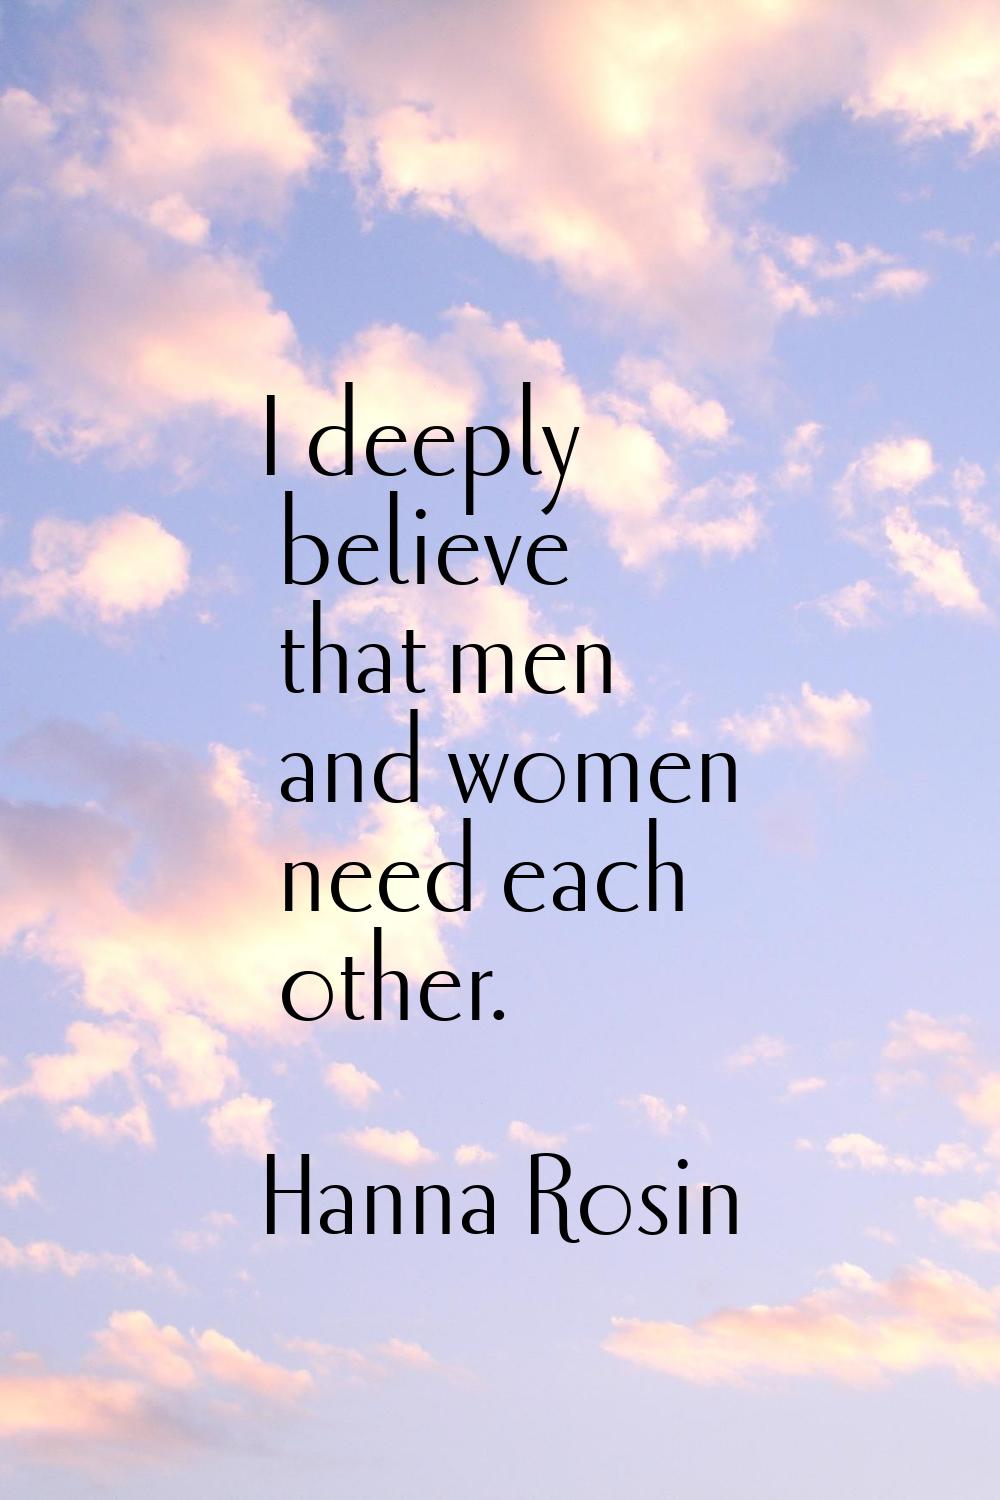 I deeply believe that men and women need each other.